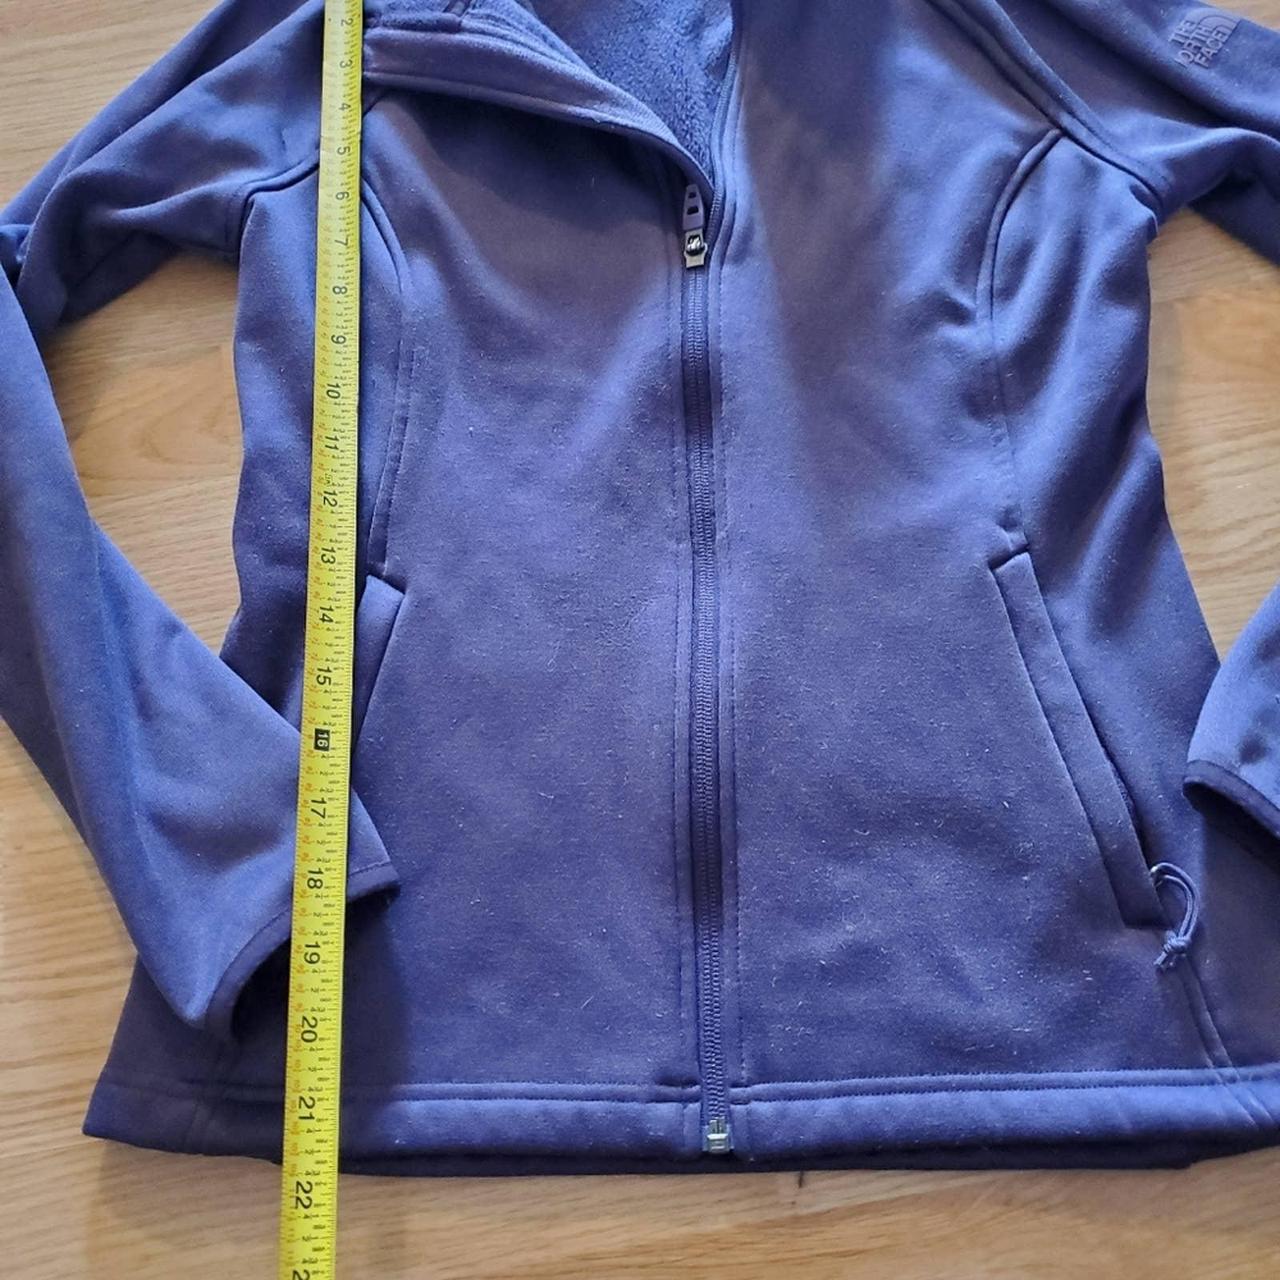 The North Face Ladies Canyon Flats Stretch Fleece Jacket.